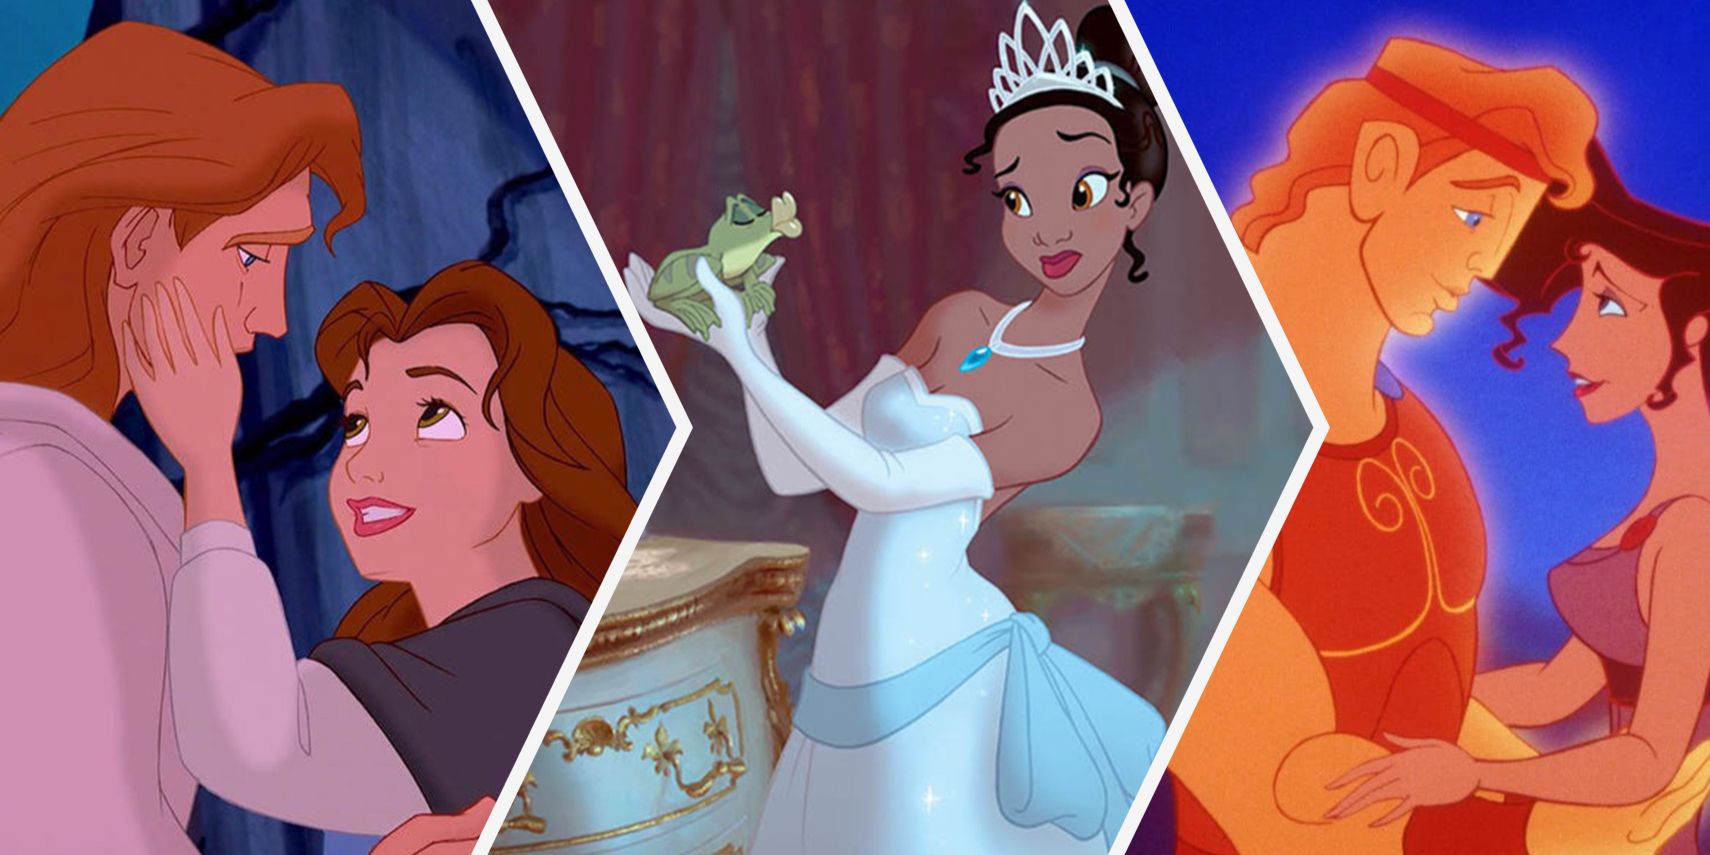 Disney Ranking Top 10 Animated Kiss Scenes From Worst To